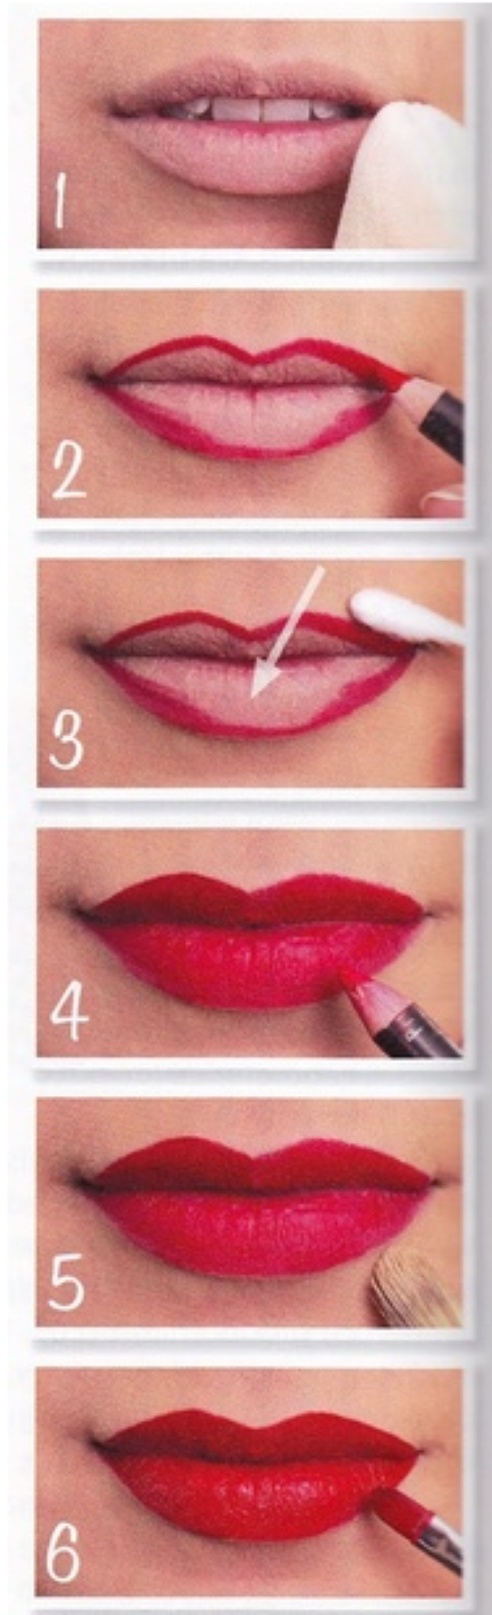 How do I get those amazing bright red lips